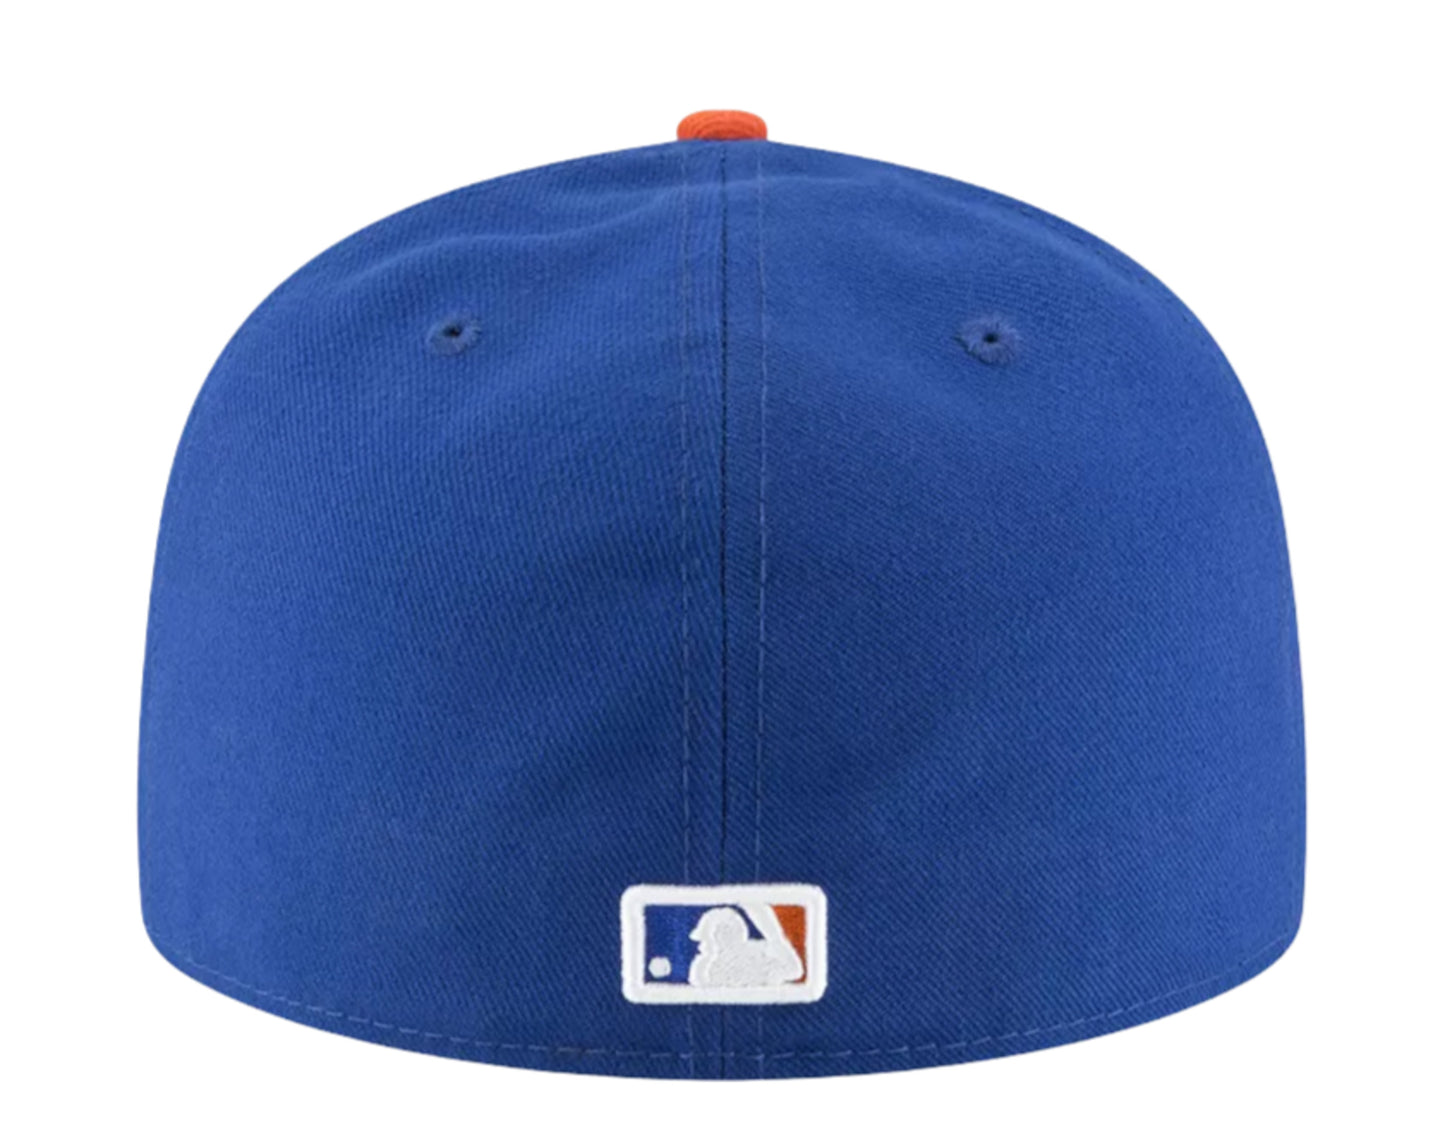 New Era 59Fifty MLB New York Mets 9/11 Memorial Fitted Hat